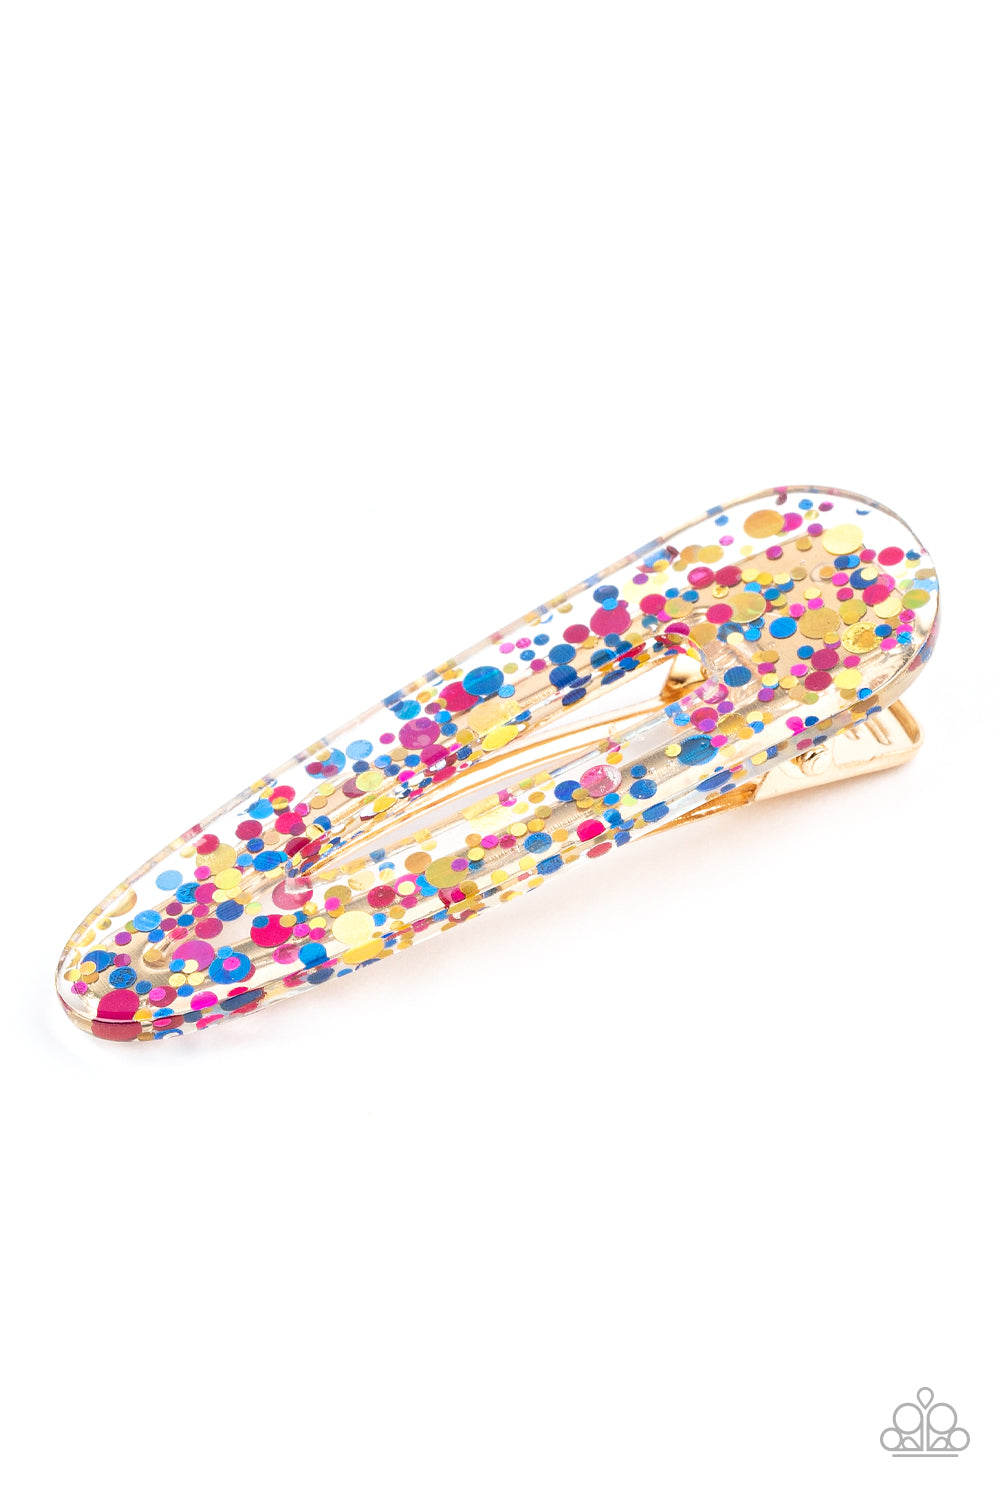 Wish Upon a Sequin Multi Hair Clip - Jewelry by Bretta